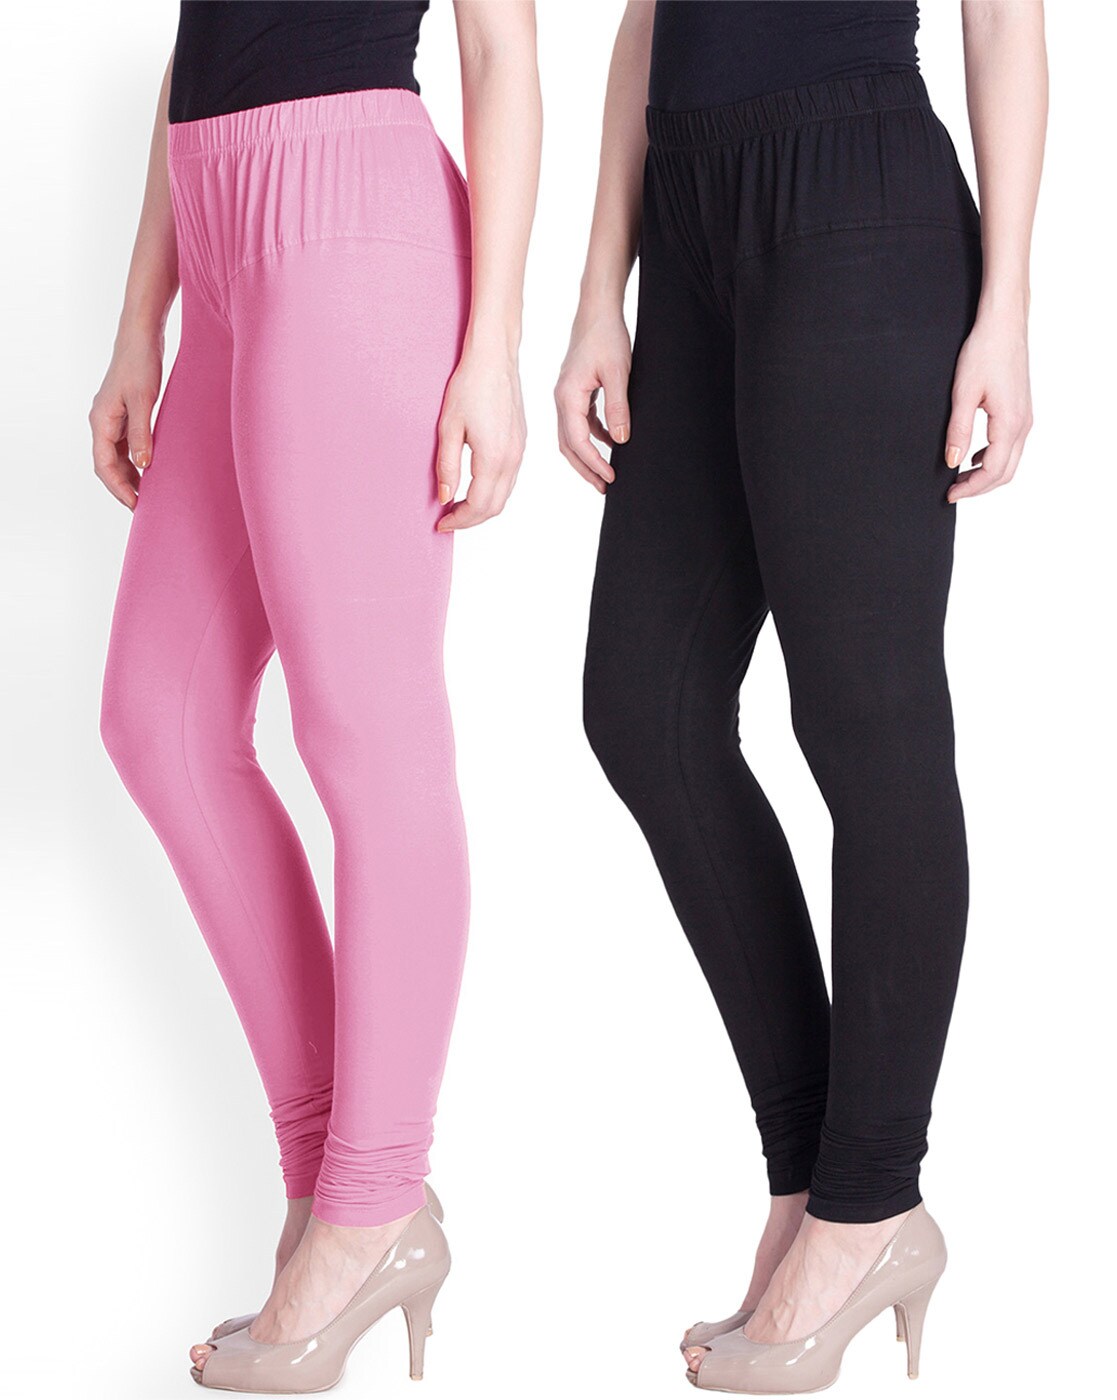 Shiny High Waist Split Leggings Lyra For Women Perfect For Streetwear,  Yoga, And Clubwear Elastic And Sexy Jeggers In Black From Peacearth, $15.19  | DHgate.Com